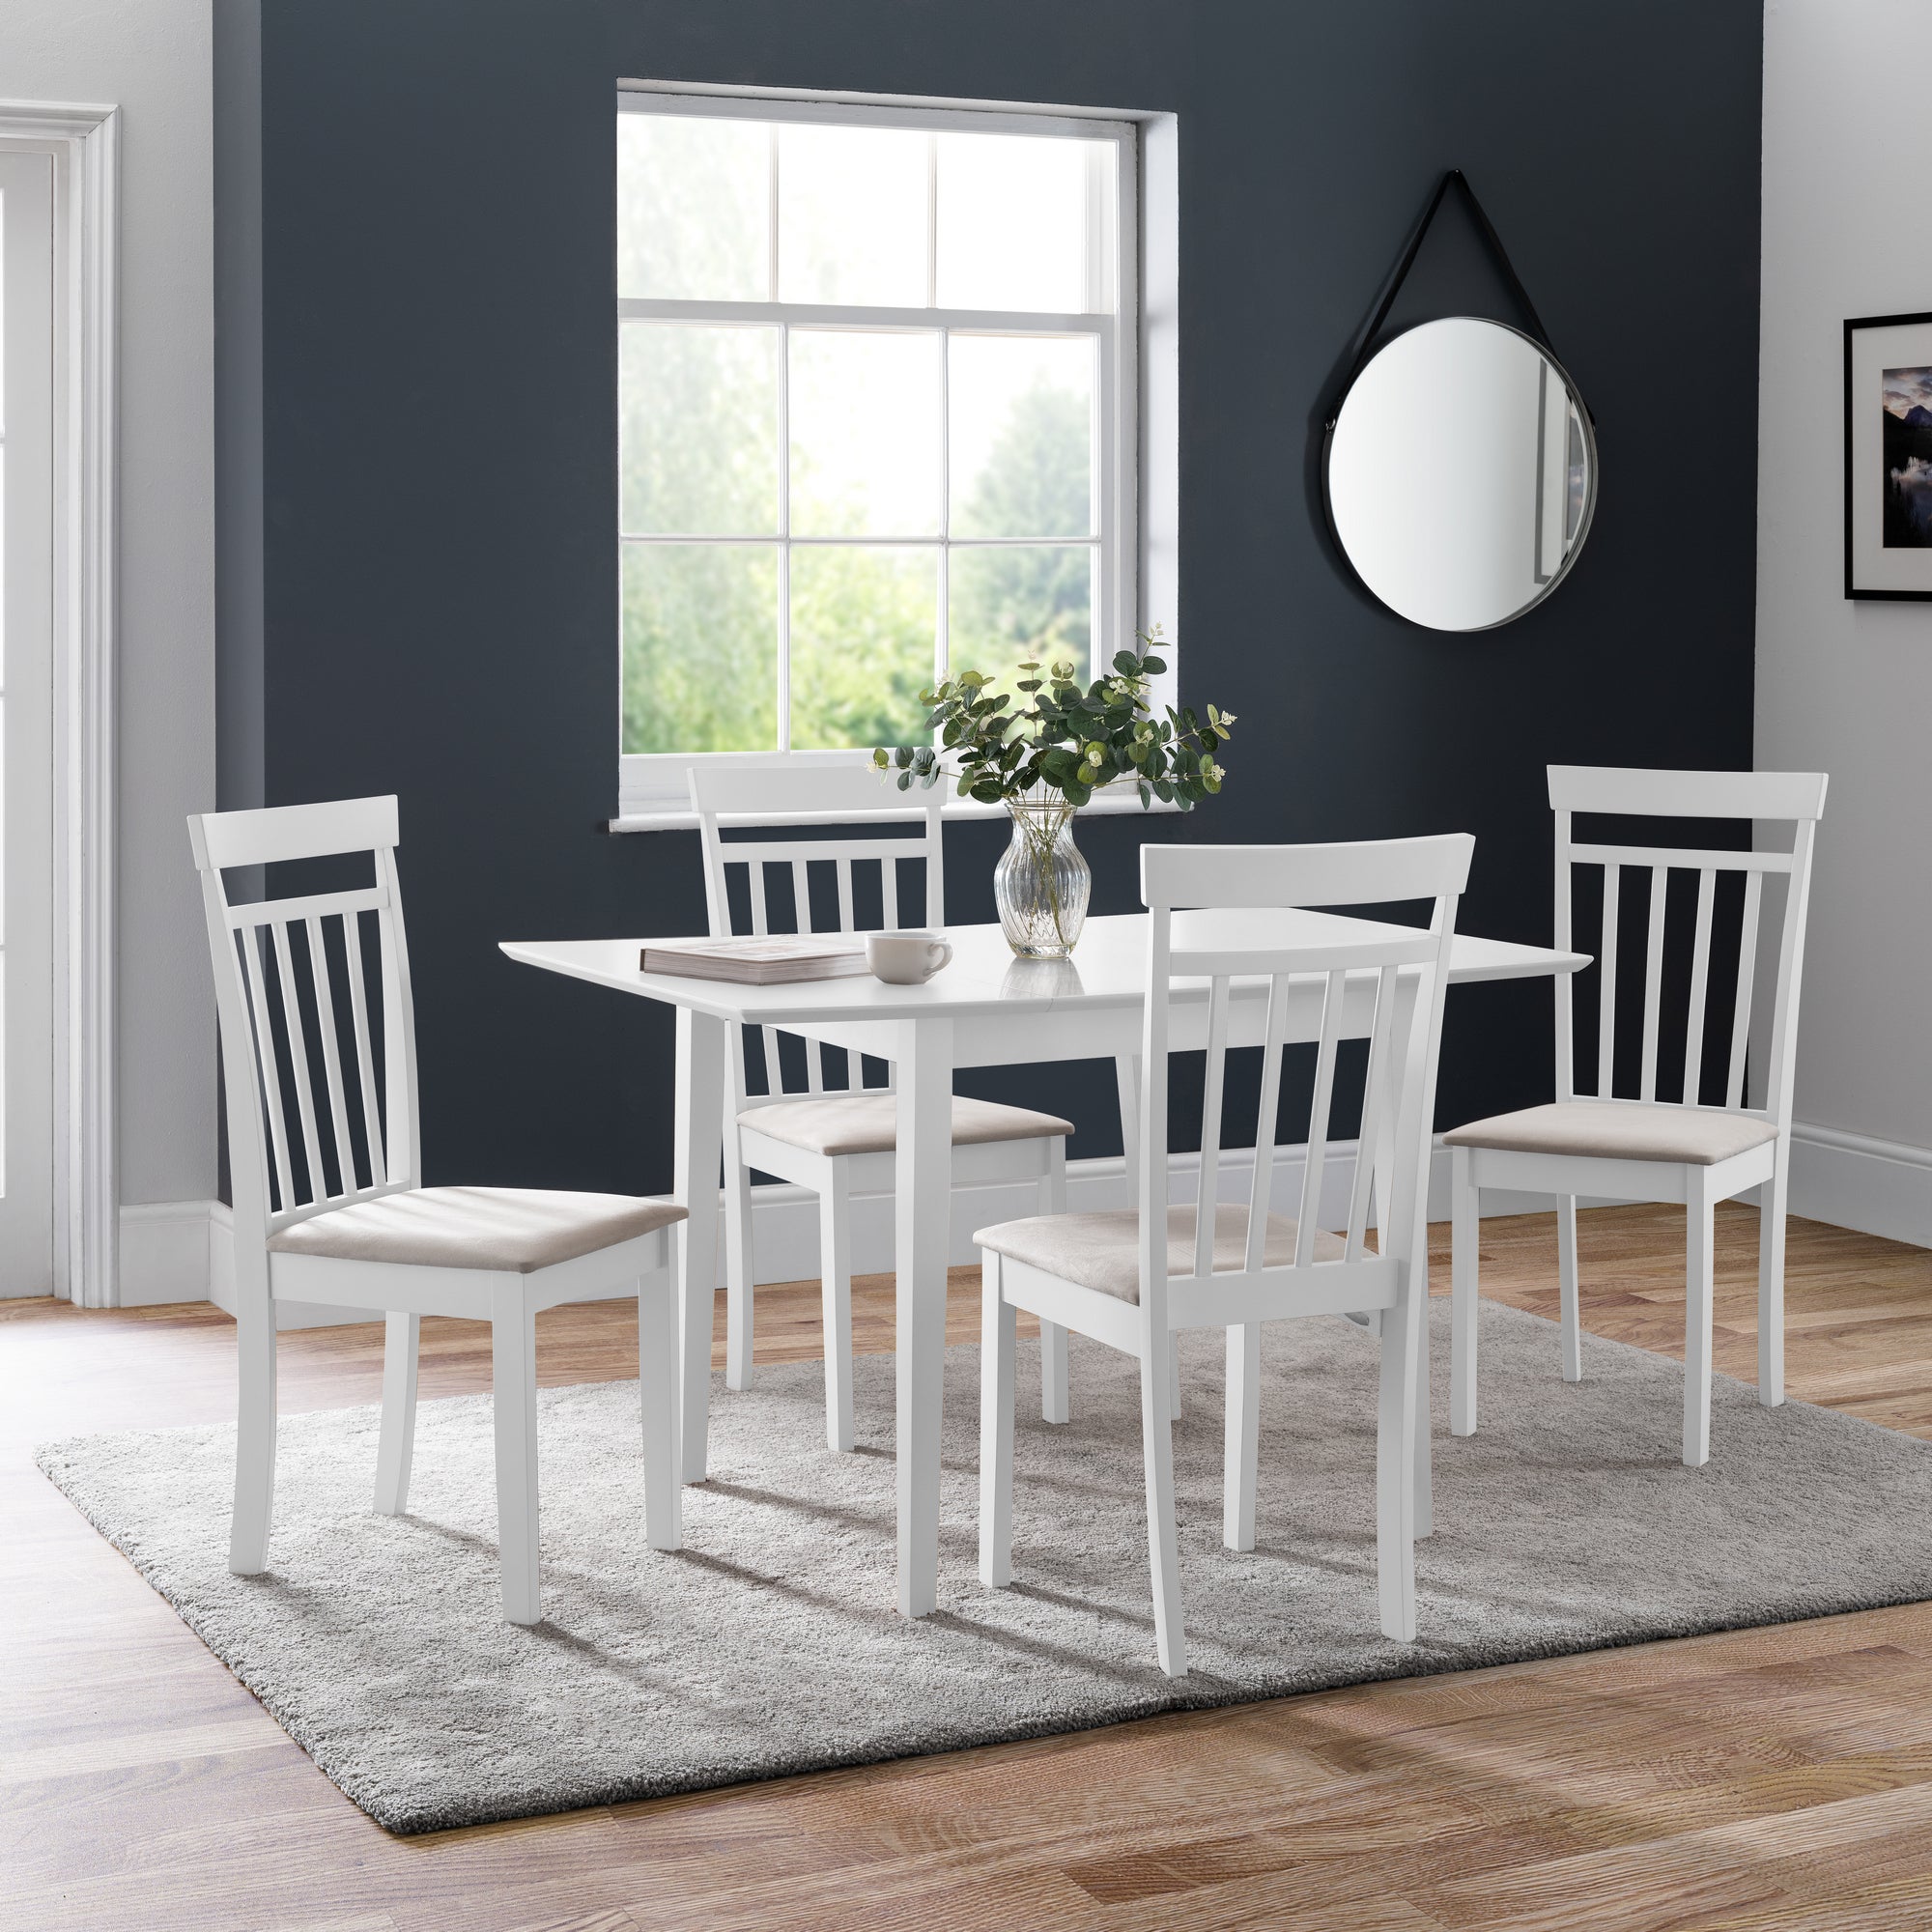 Rufford Dining Table with 4 Coast Chairs White